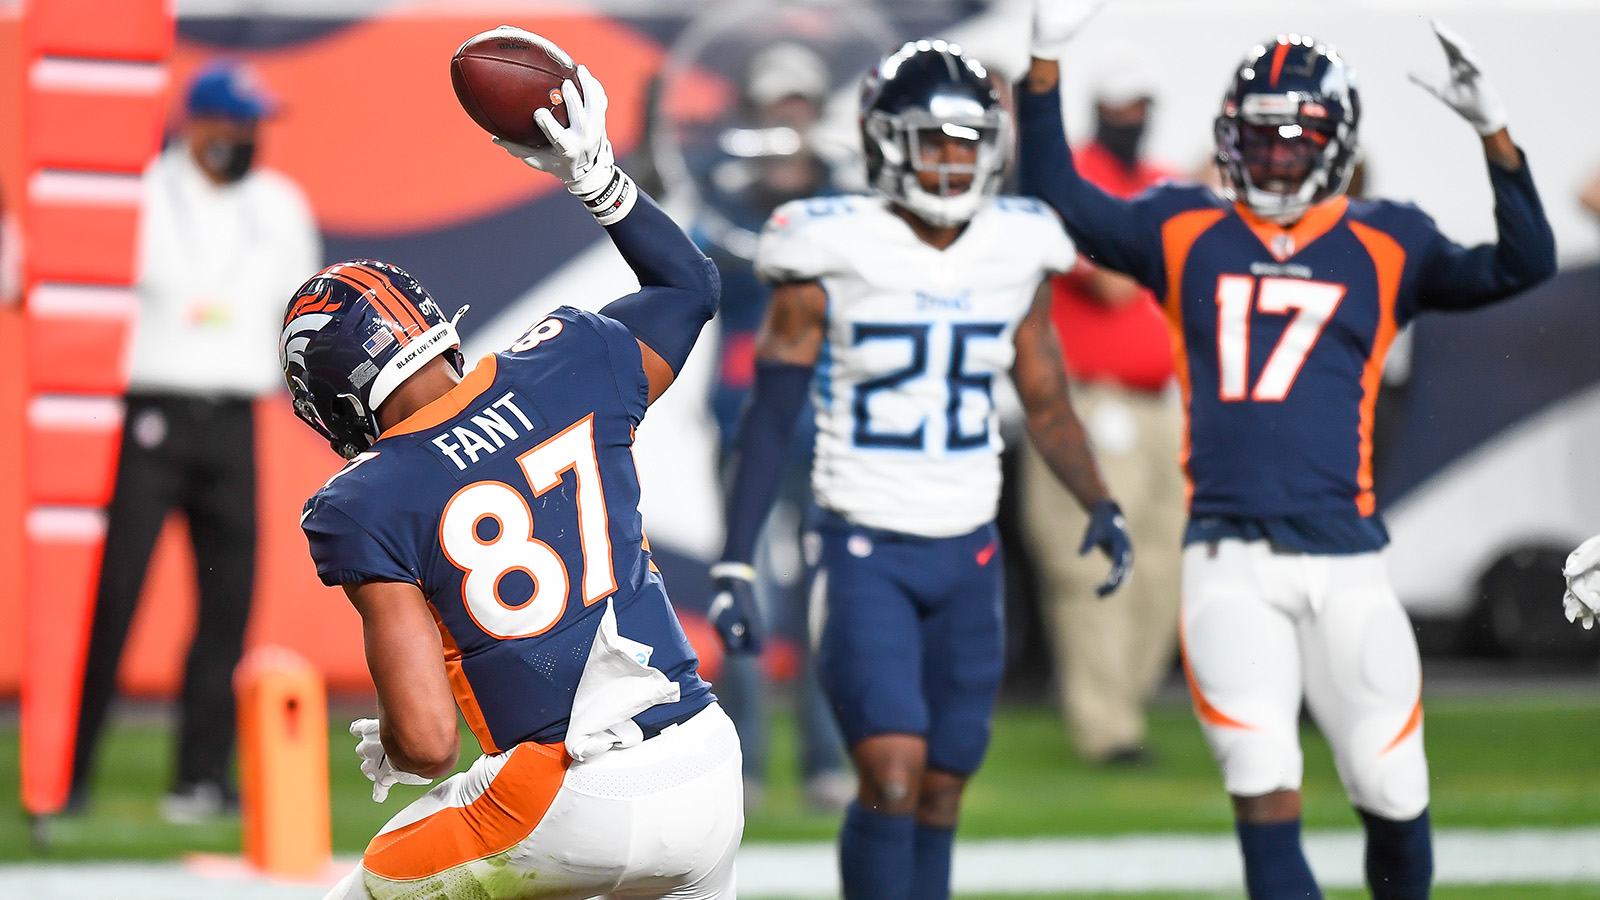 Noah Fant of the Denver Broncos celebrates after a first quarter touchdown reception against the Tennessee Titans at Empower Field at Mile High.